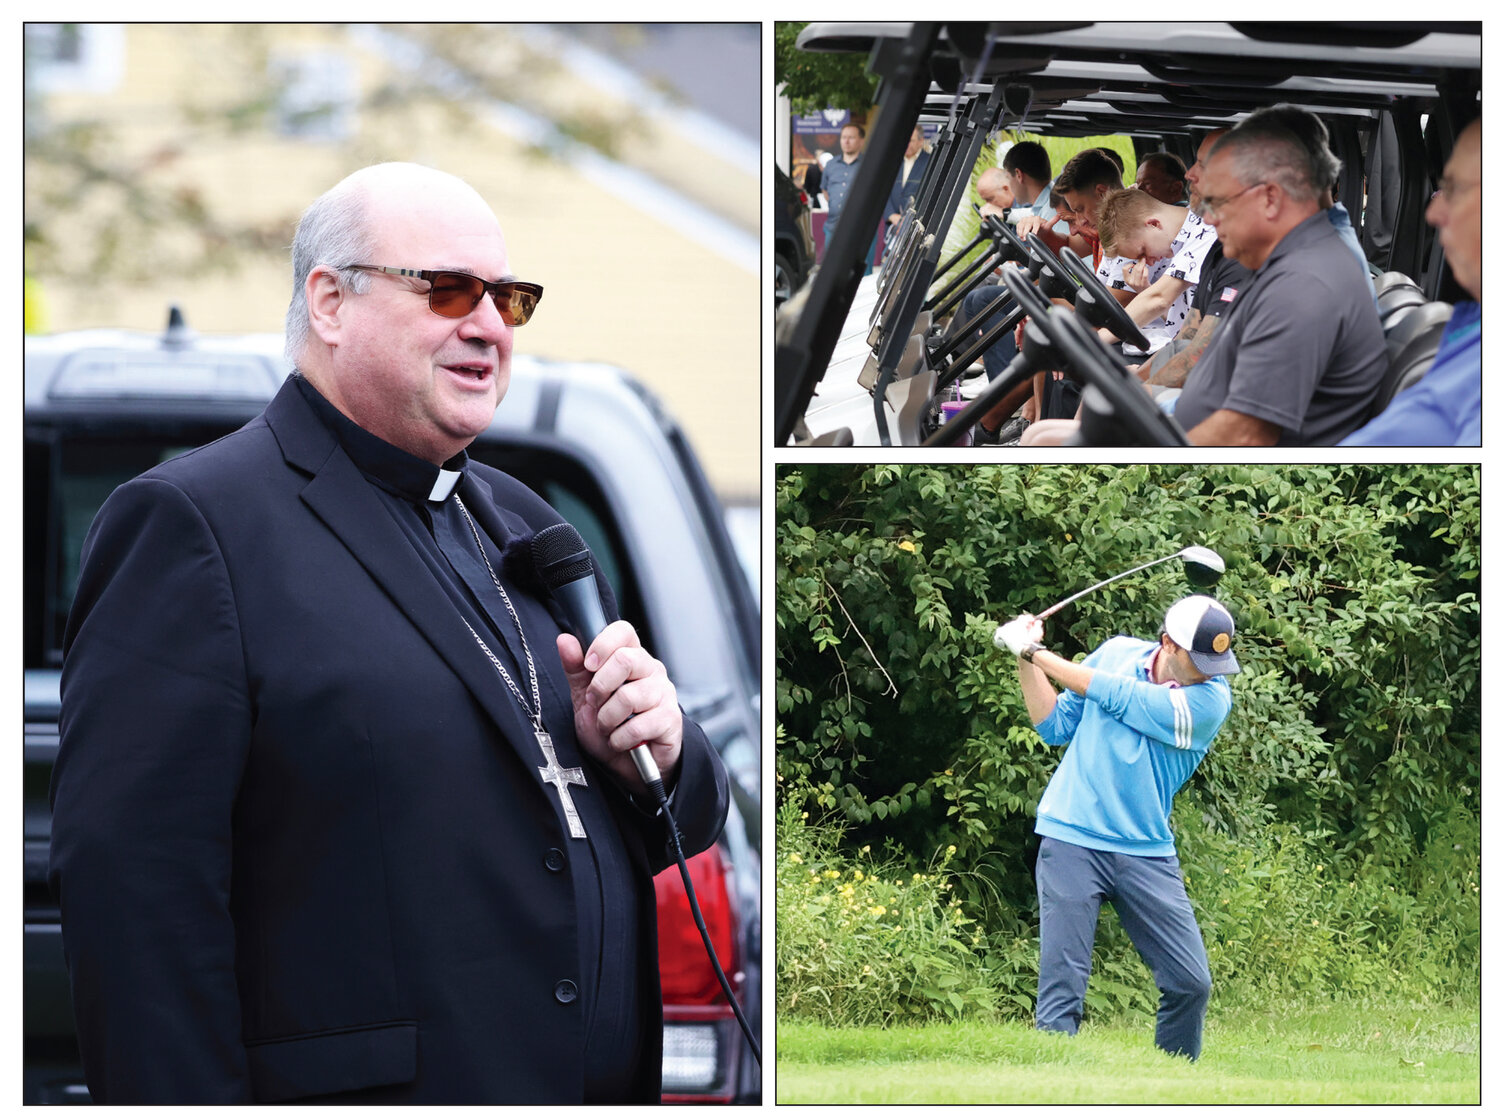 Golfers bow their heads in prayer as Bishop Richard G. Henning offers a blessing.